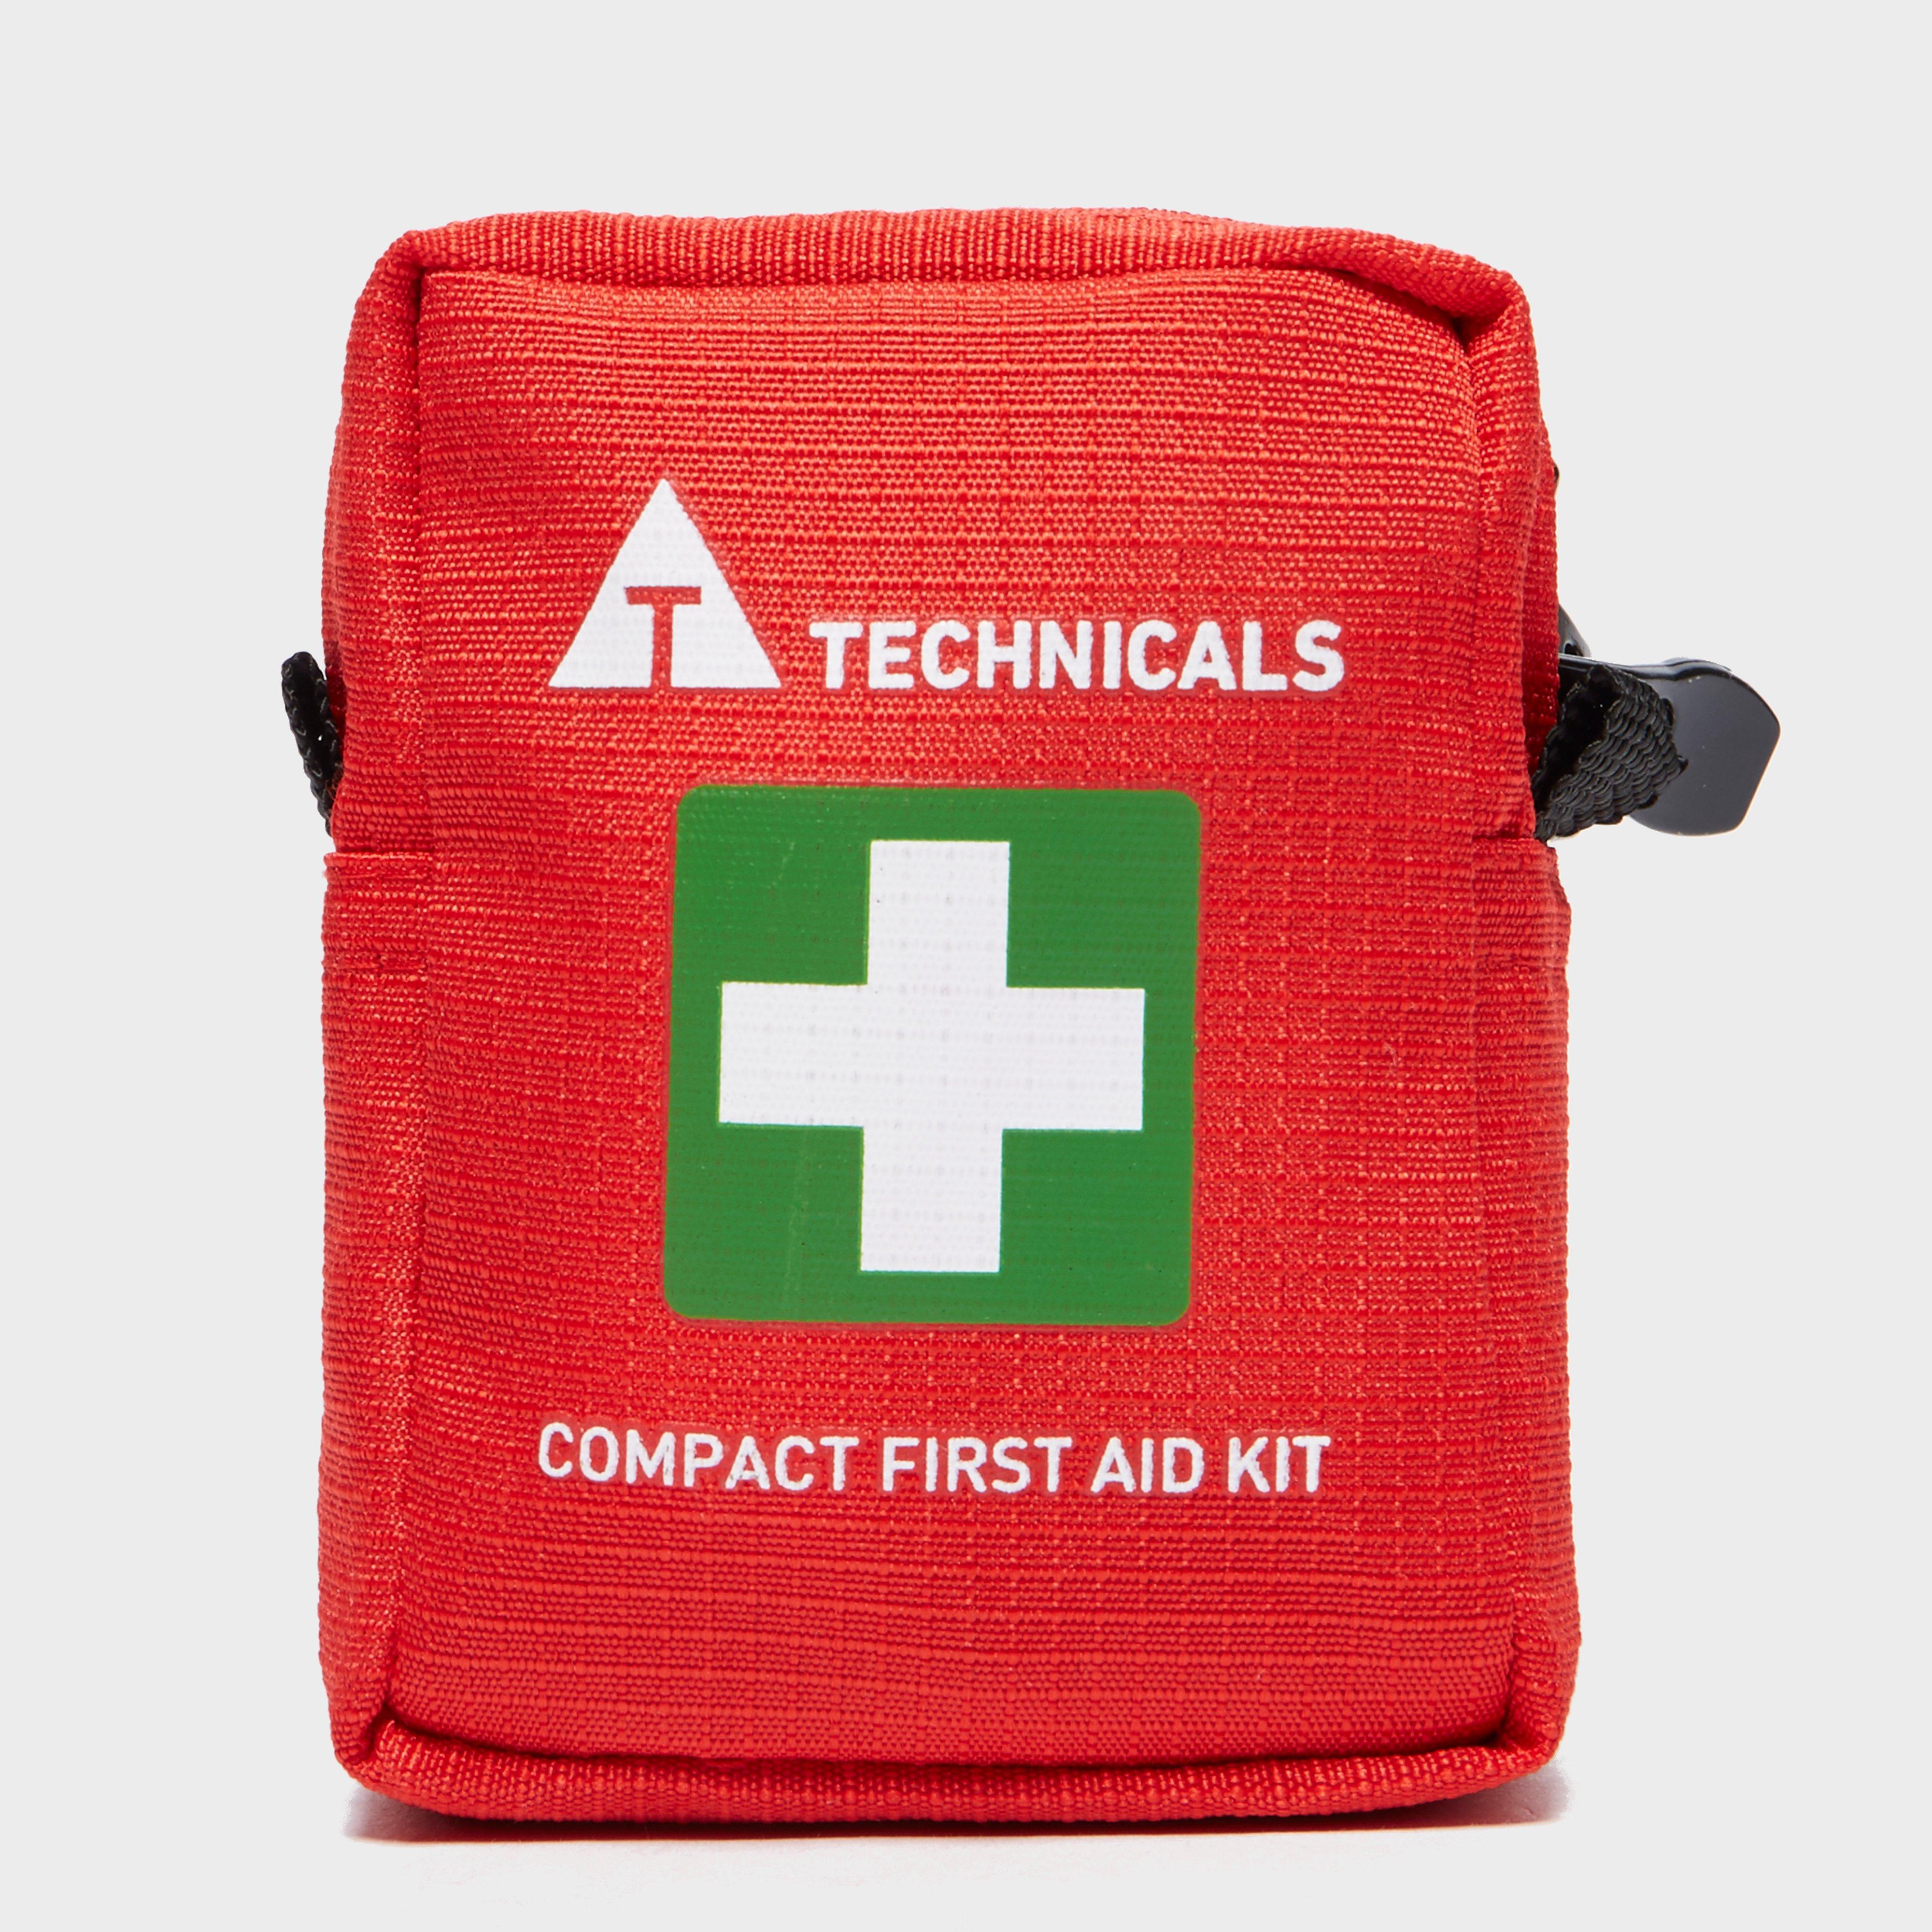 Technicals Compact First Aid Kit - Red/red  Red/red